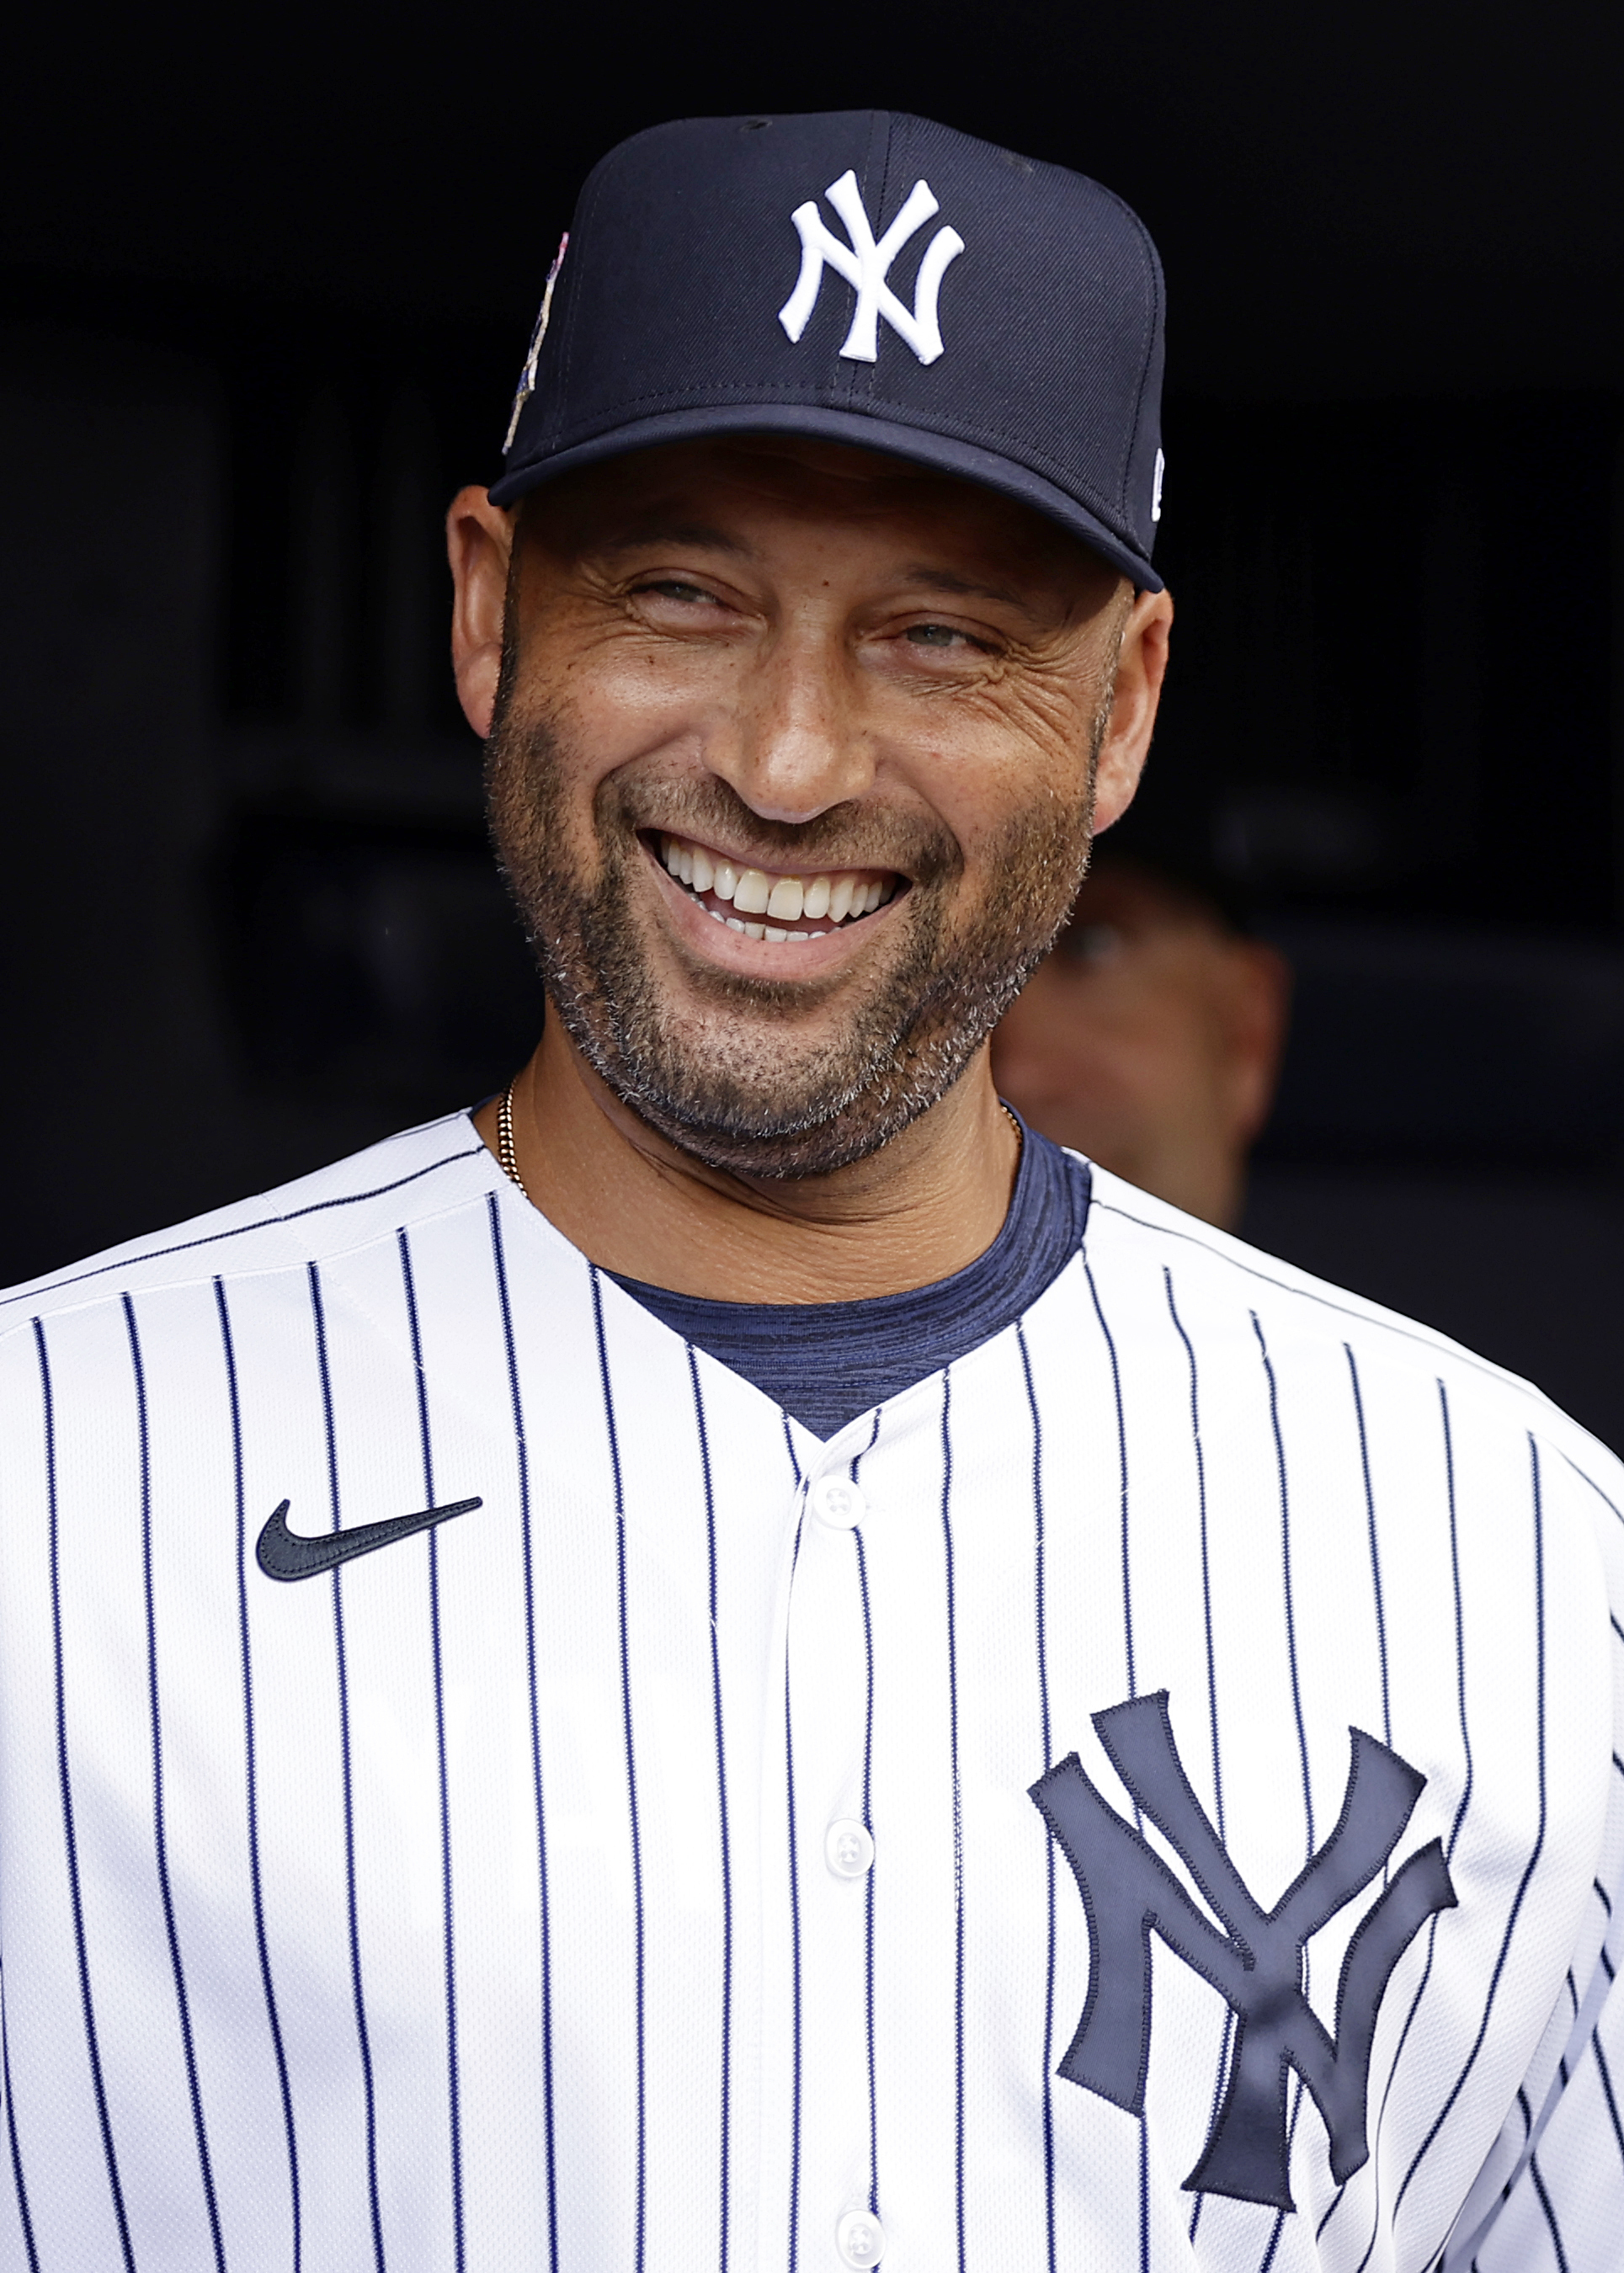 Jeter returns as Yankees honor 1998 team at Old-Timers' Day, Boone booed by  some – NewsNation